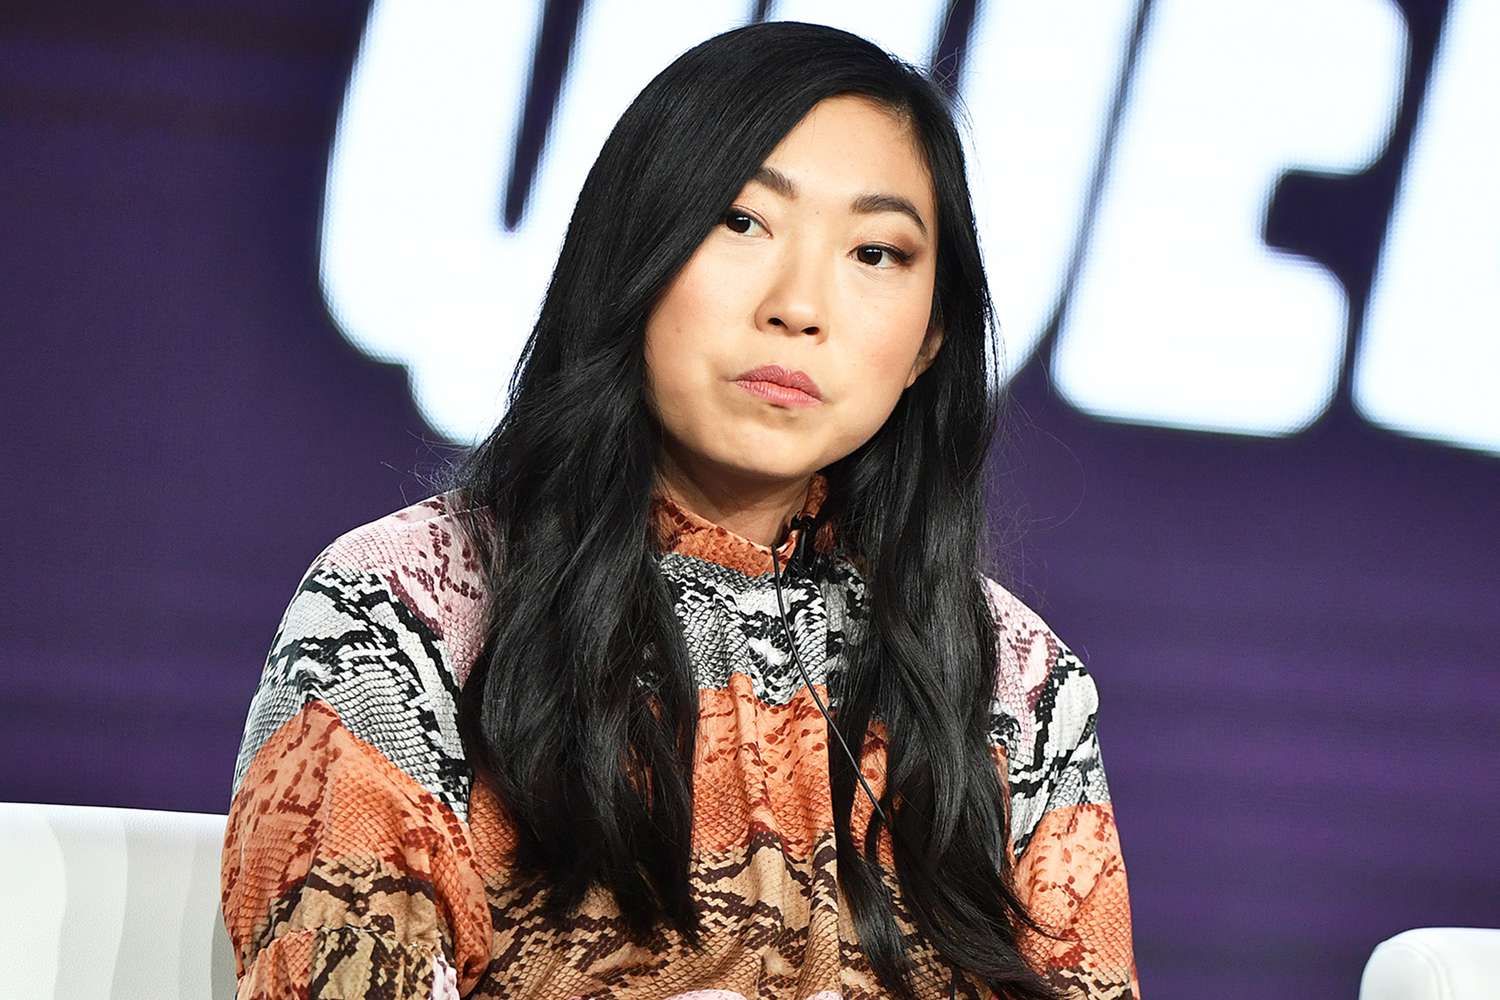 Awkwafina of "Awkwafina is Nora from Queens" speaks during the Comedy Central segment of the 2020 Winter TCA Press Tour at The Langham Huntington, Pasadena on January 14, 2020 in Pasadena, California.